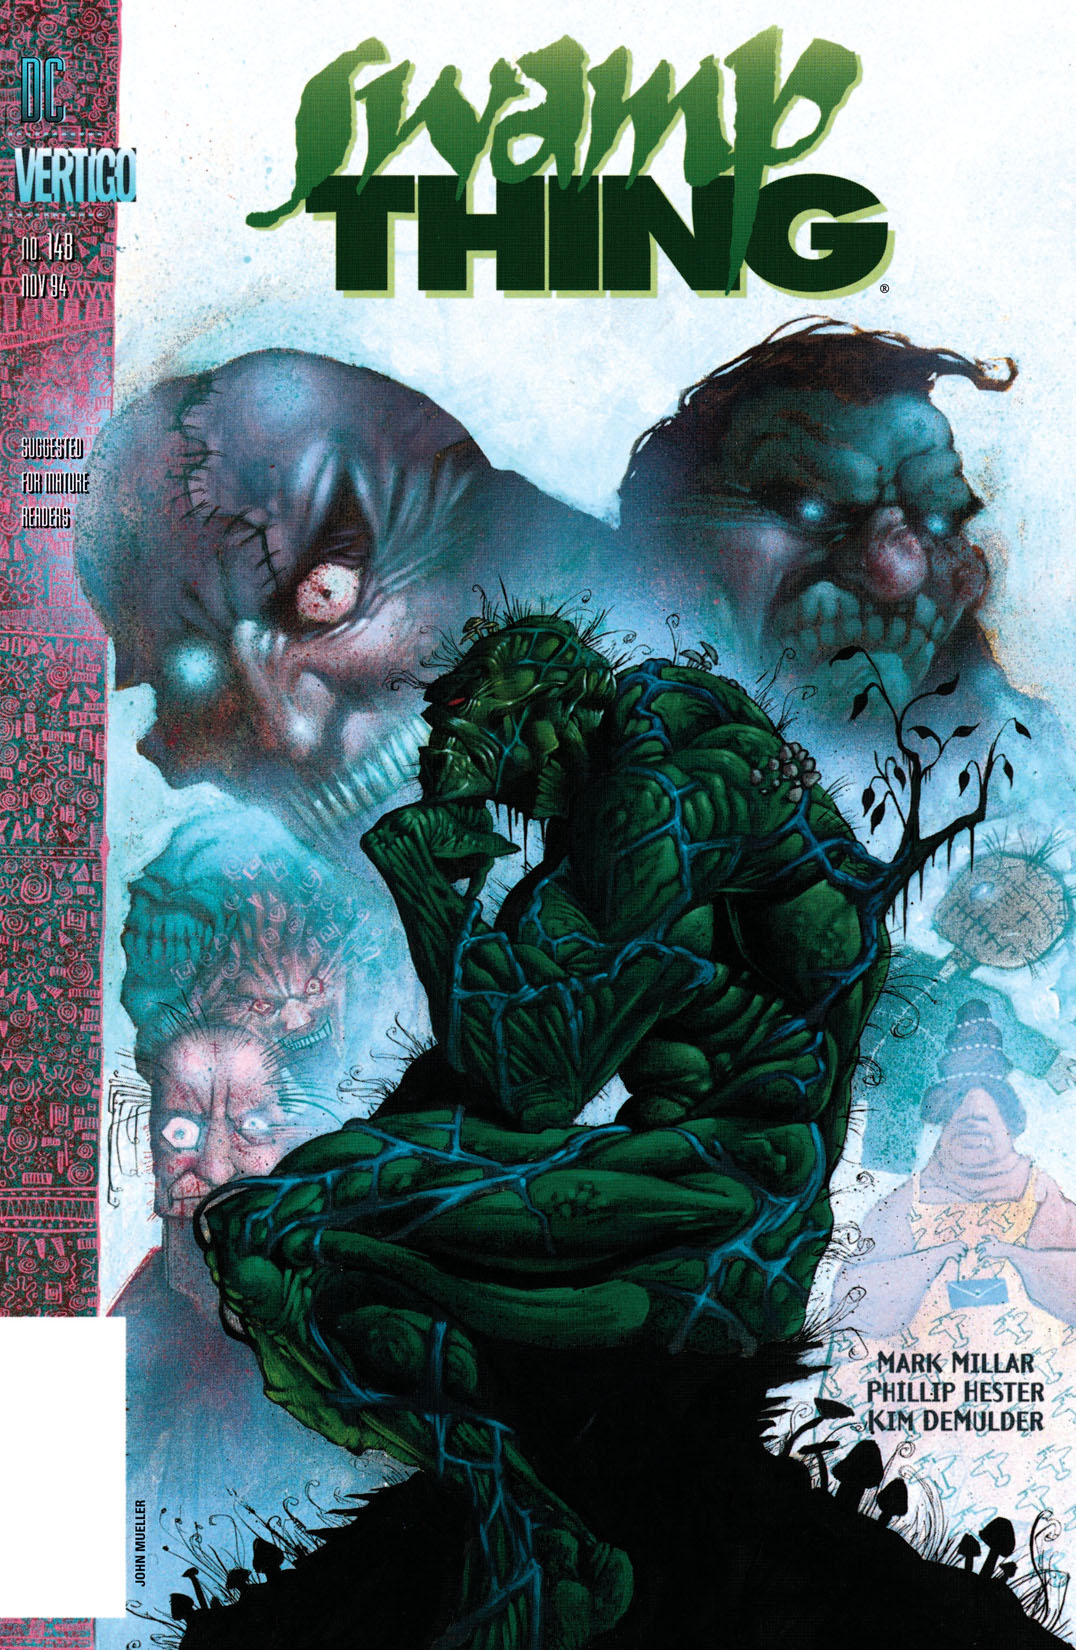 Swamp Thing (1985-) #148 preview images